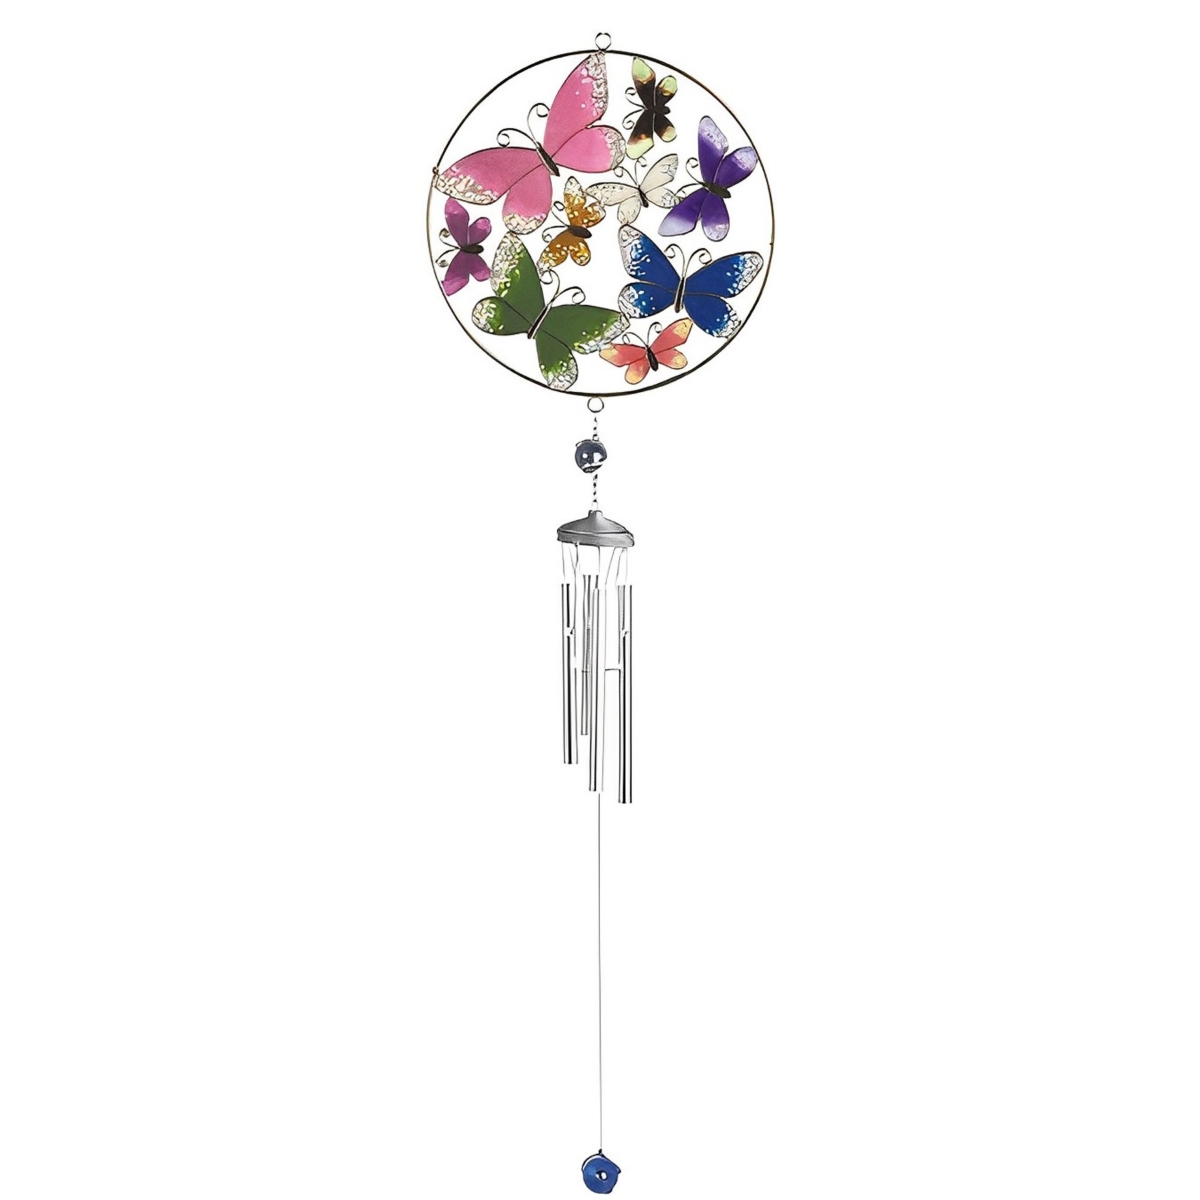 34" Long Butterfly Suncatcher Wind Chime with Gem Home Decor Perfect Gift for House Warming, Holidays and Birthdays - Multi